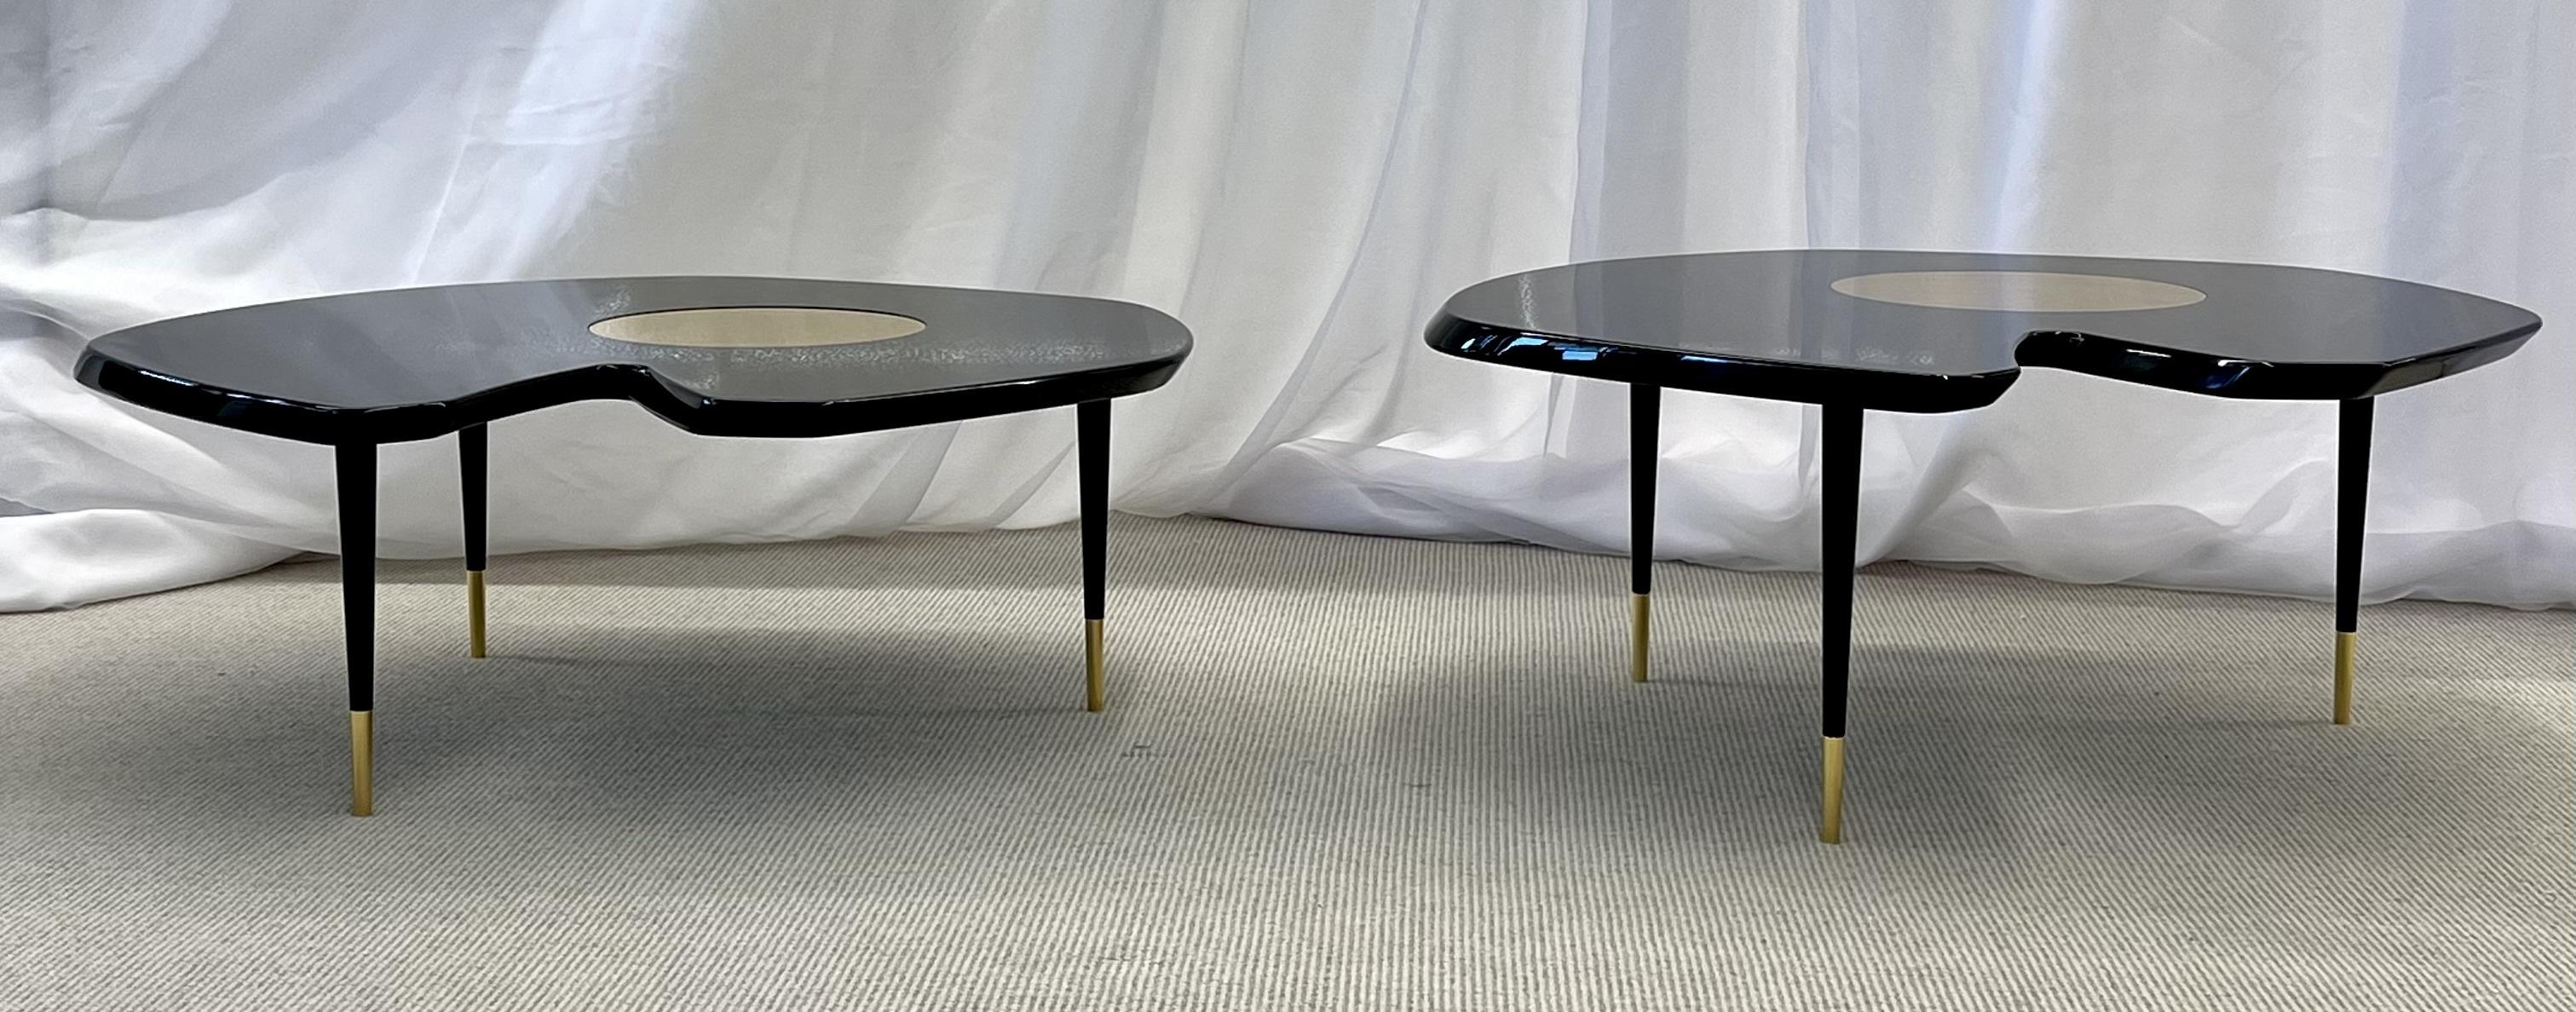 Pair of Fendi Casa Fleurette coffee tables or cocktail tables, lacquer, bronze, organic, Fendi Casa
 
Fleurette coffee tables by Thierry Lamaire, Each Marked Fendi table glossy lacquered steel. Steel details in bronze shadow finish.
 
Can